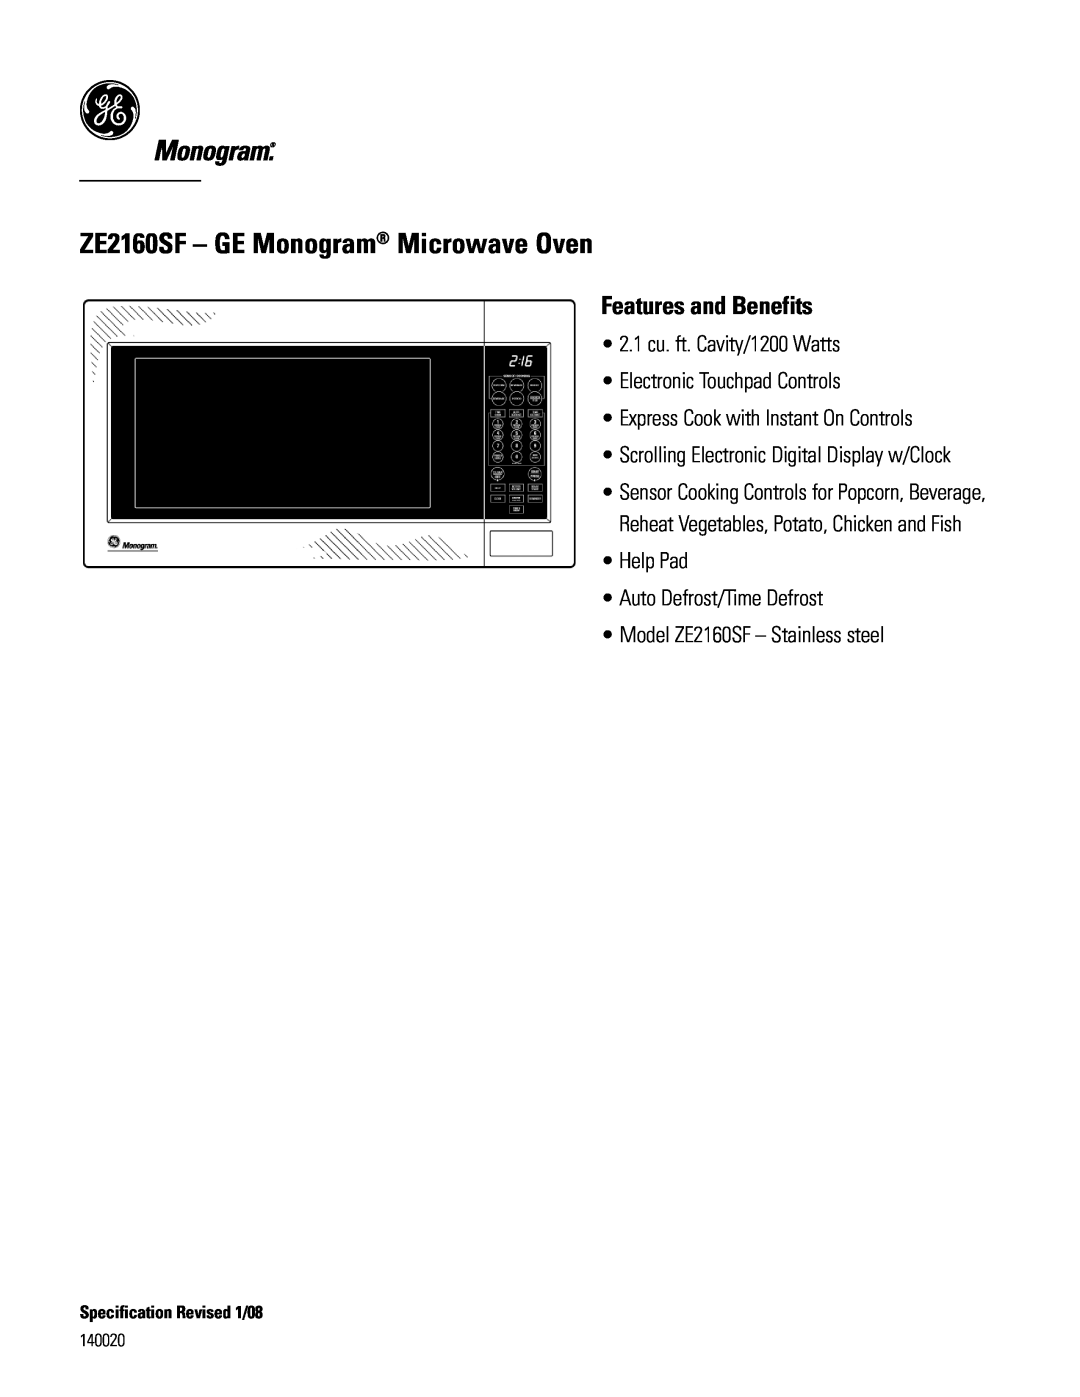 GE dimensions ZE2160SF - GE Monogram Microwave Oven, Features and Benefits, 2.1 cu. ft. Cavity/1200 Watts, 140020 